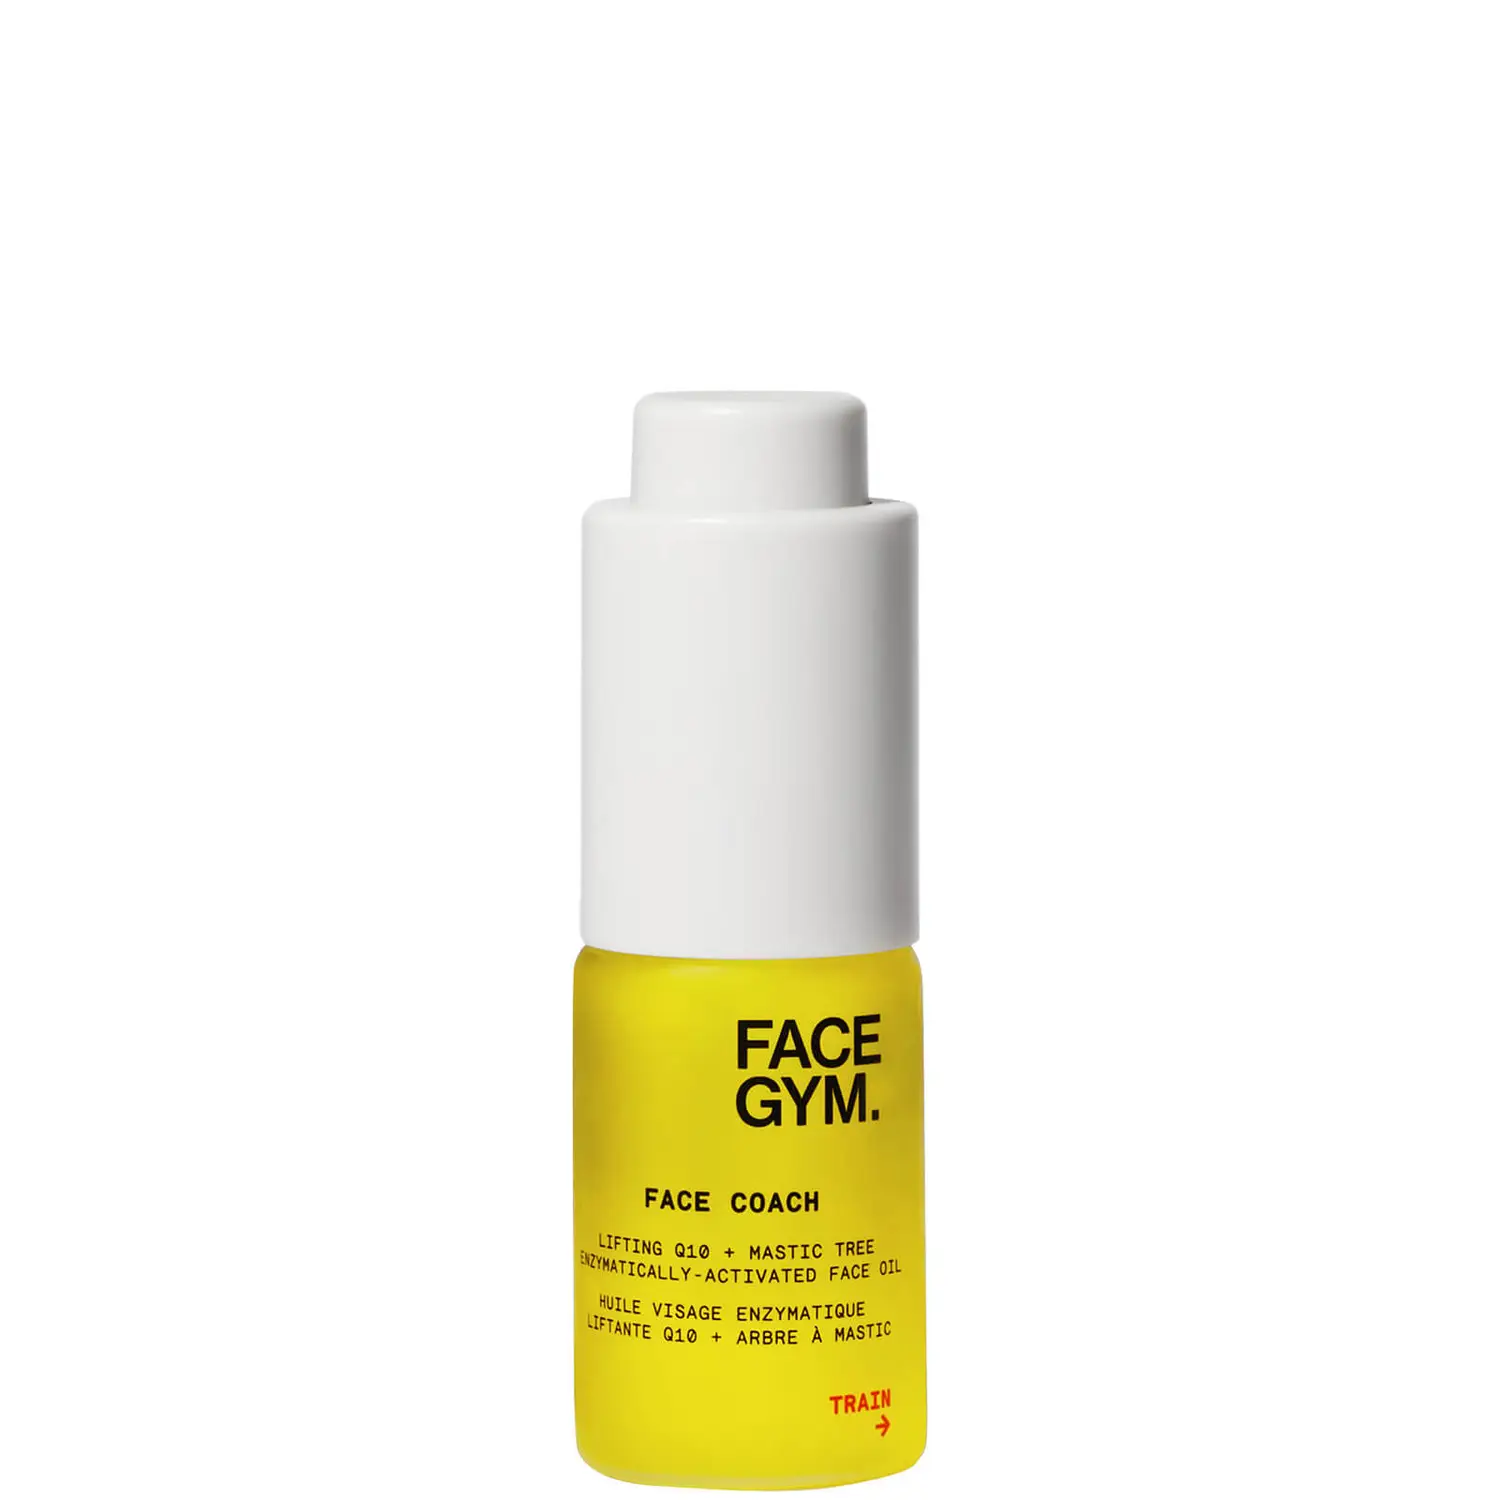 FaceGym Face Coach Lifting Q10 and Mastic Tree Enzymatically-activated Face Oil